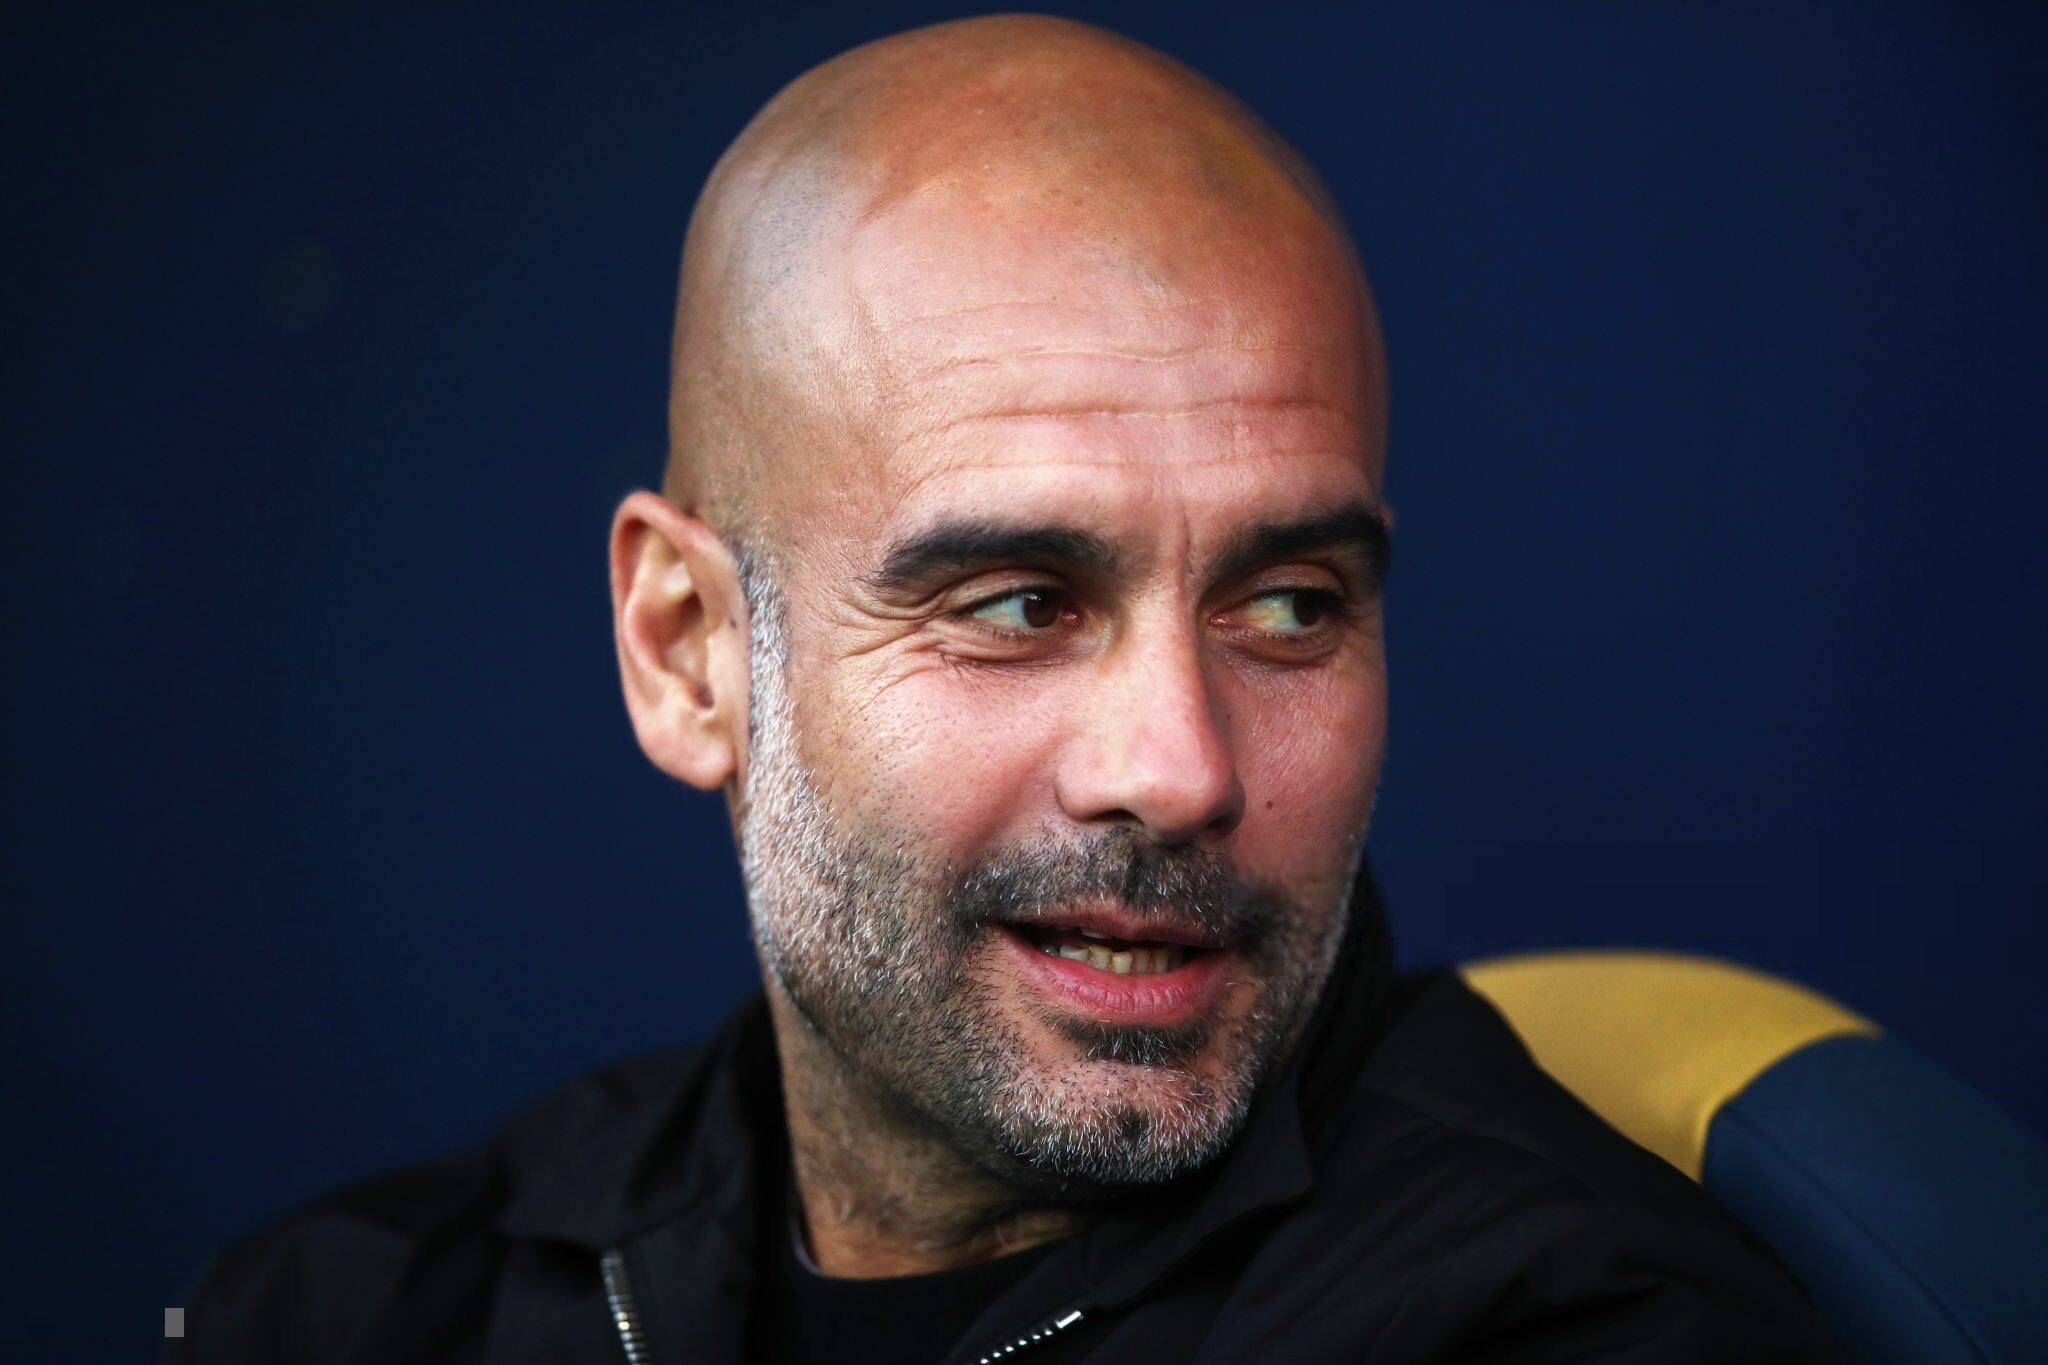 Man City respond to Guardiola exit reports